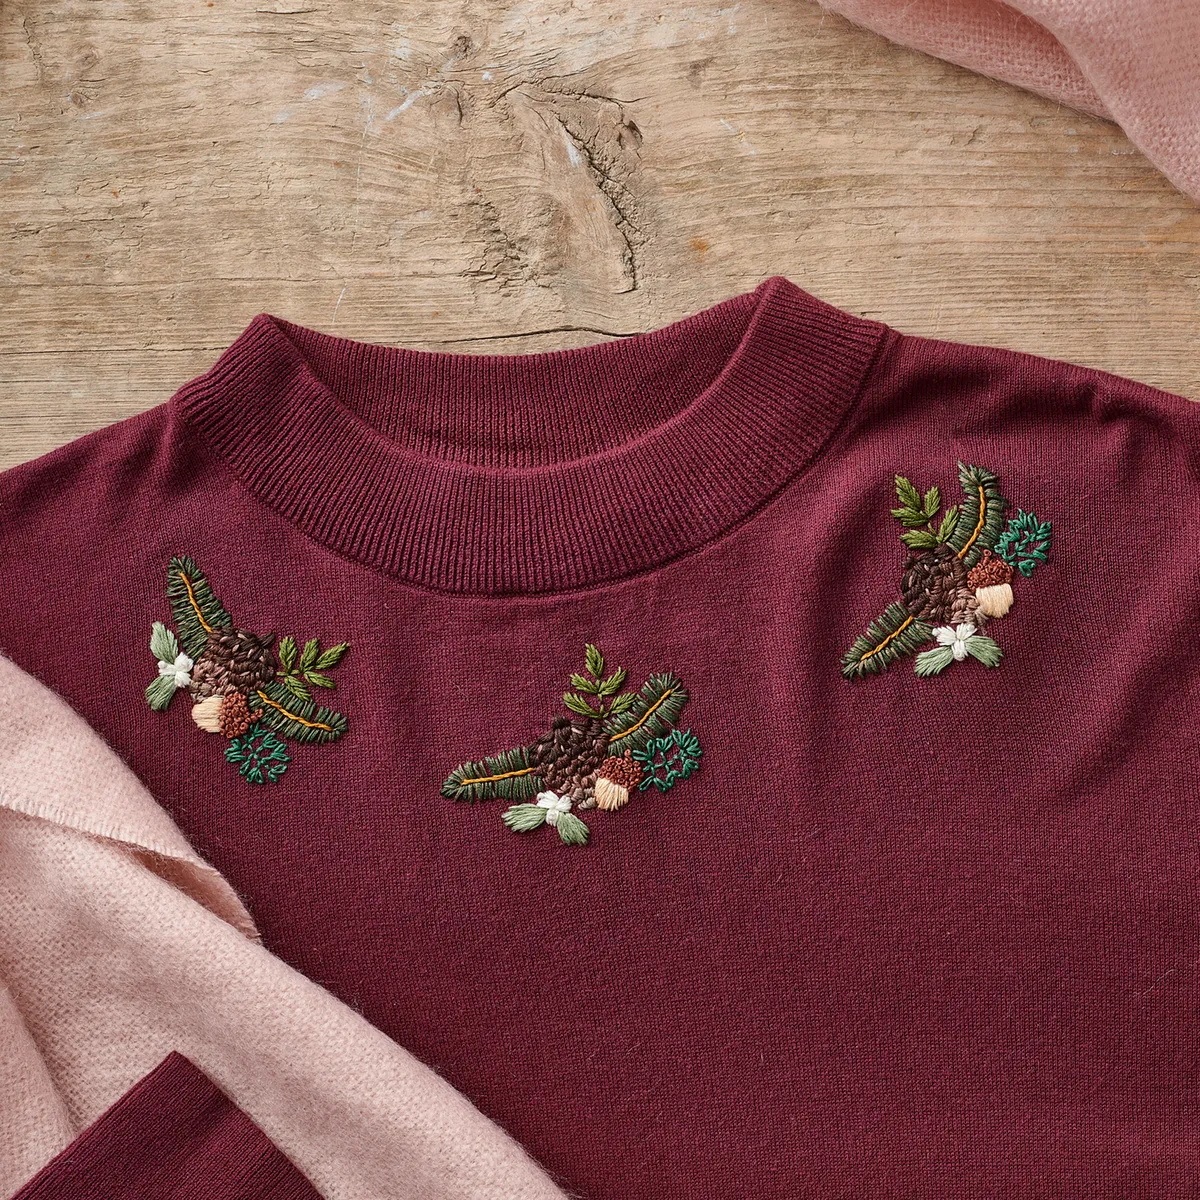 Pine needle jumper from Love Embroidery issue 19.jpg